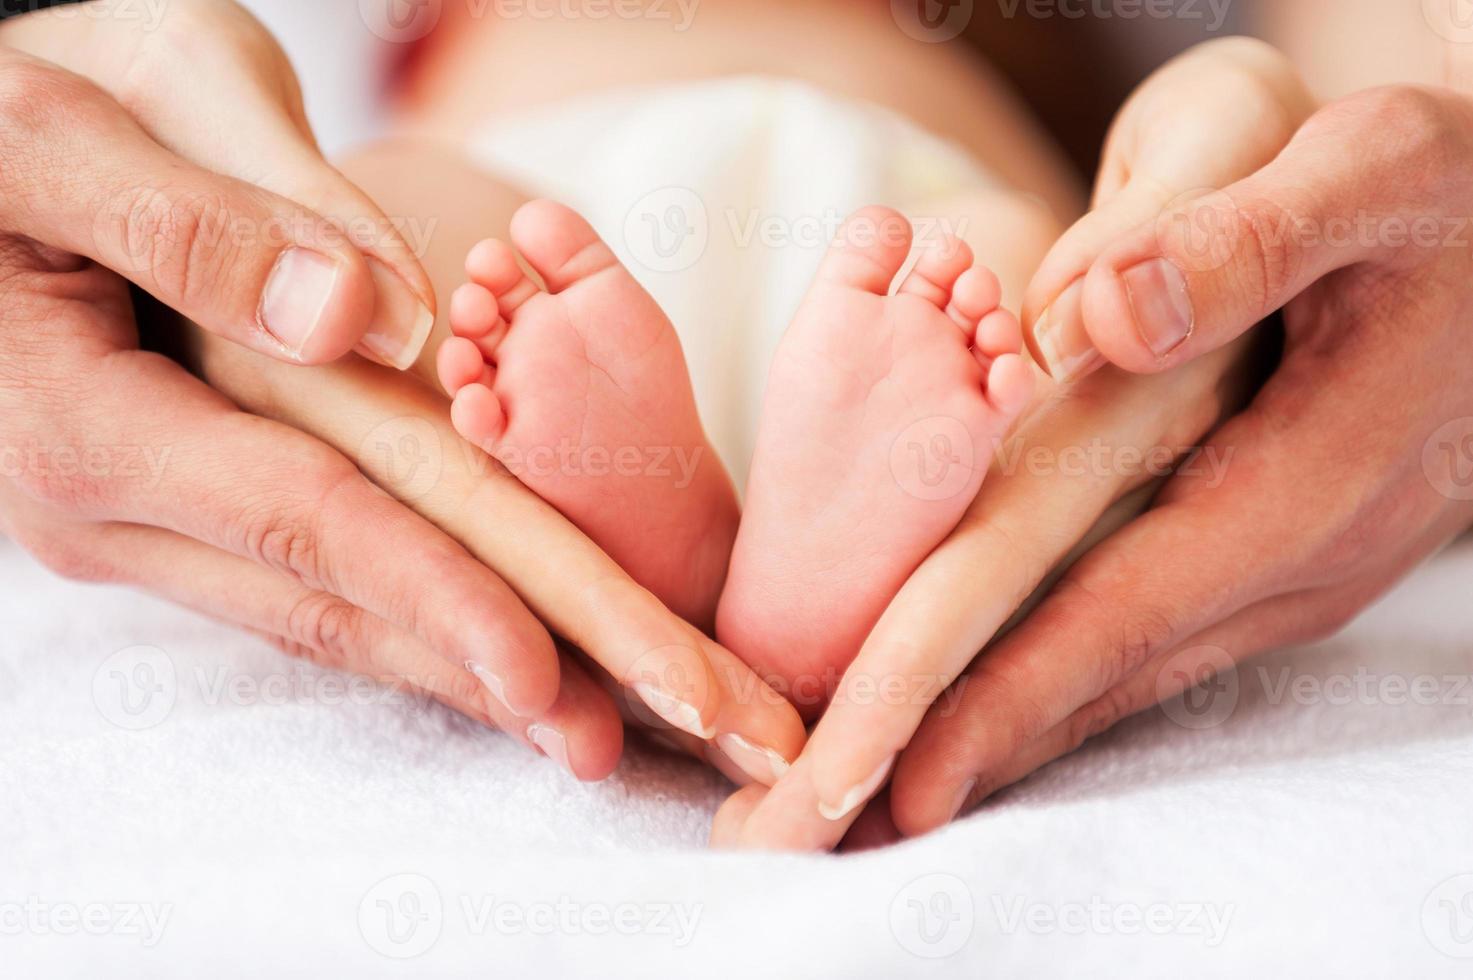 We are family. Close-up of parents holding the tiny feet of their little baby photo